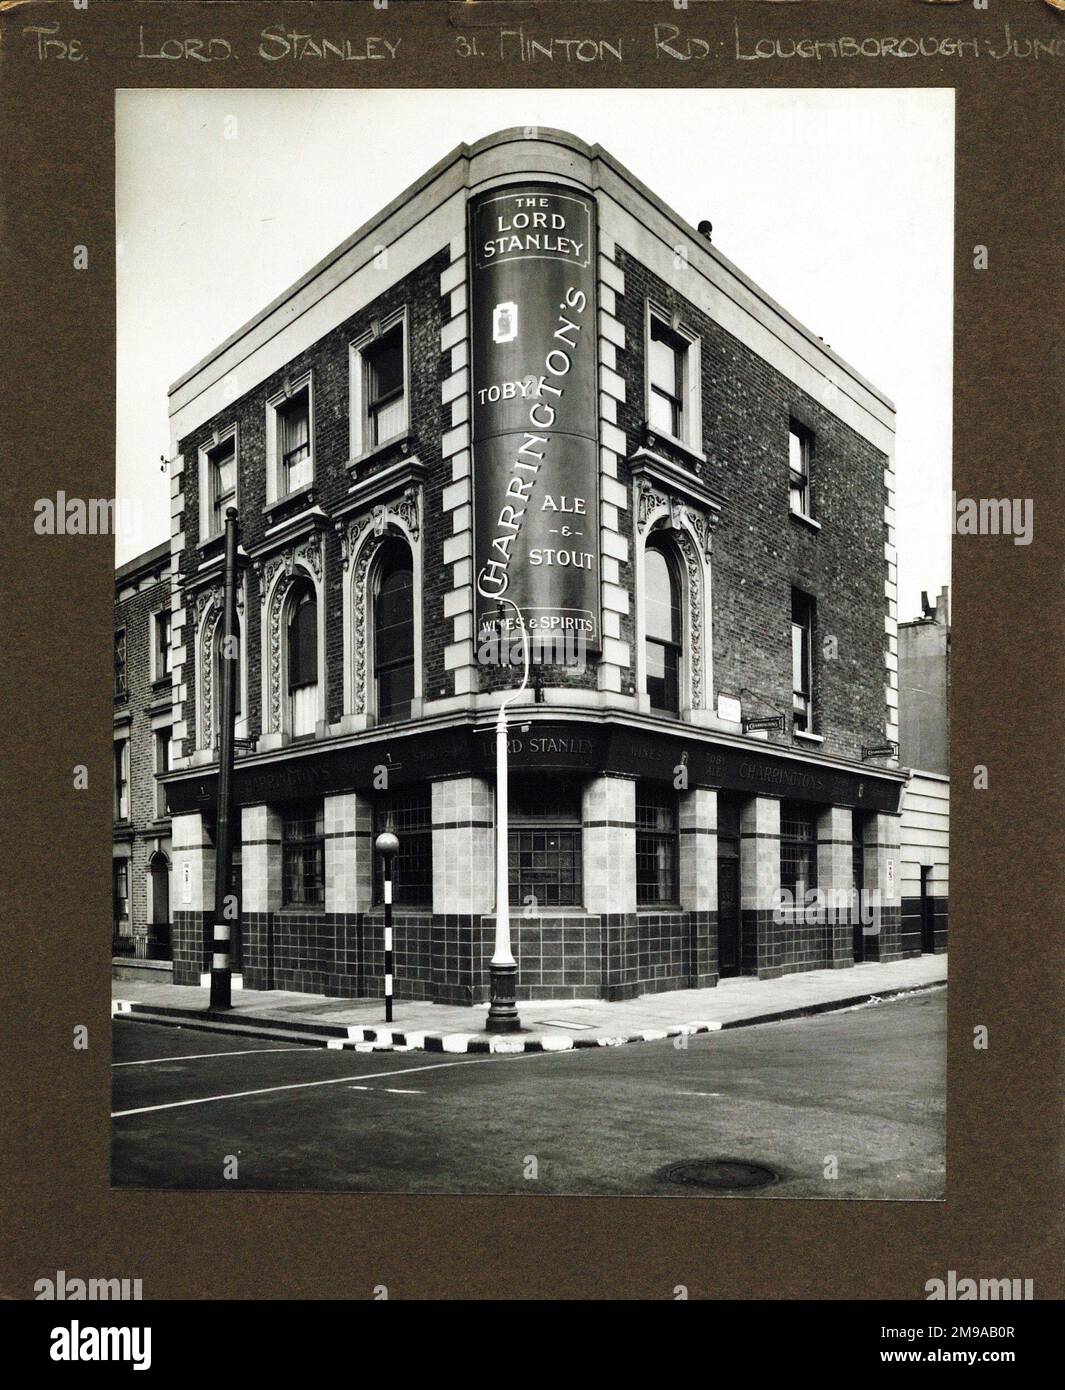 Photograph of Lord Stanley PH, Loughborough Junction, London. The main side of the print (shown here) depicts: Corner on view of the pub.  The back of the print (available on request) details: Nothing for the Lord Stanley, Loughborough Junction, London SE24 0HQ. As of July 2018 . Totally destroyed by enemy action 15 Oct 1940.Reopened as lock up shop 28 July 1941 Stock Photo